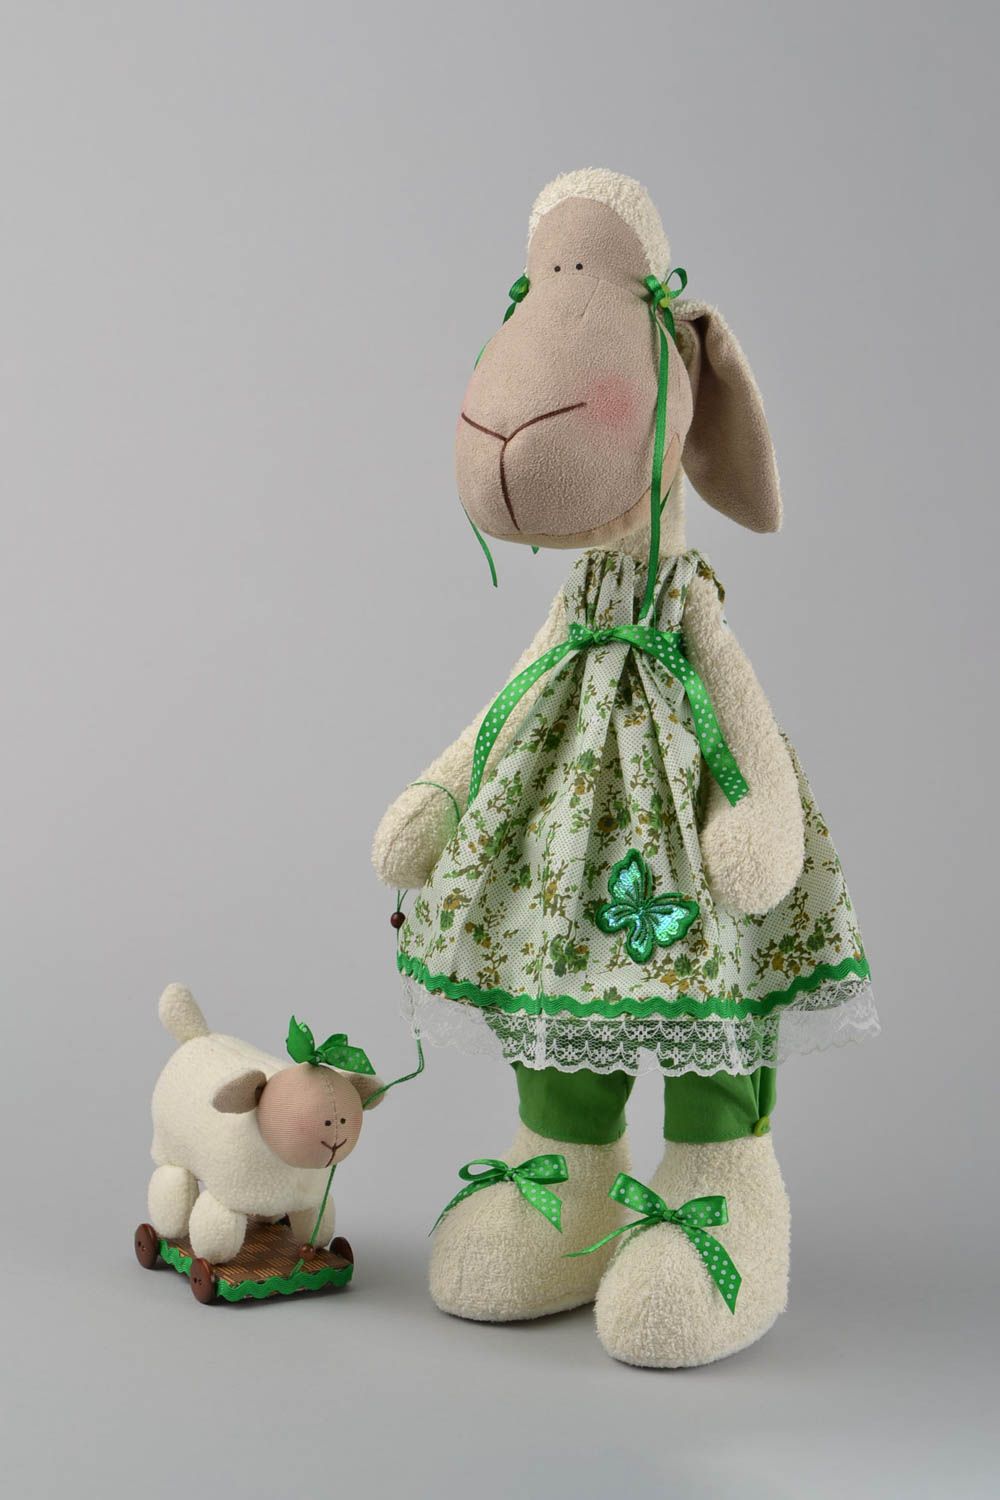 Handmade designer interior fabric soft toy Lamb in green dress with wheeled toy photo 3